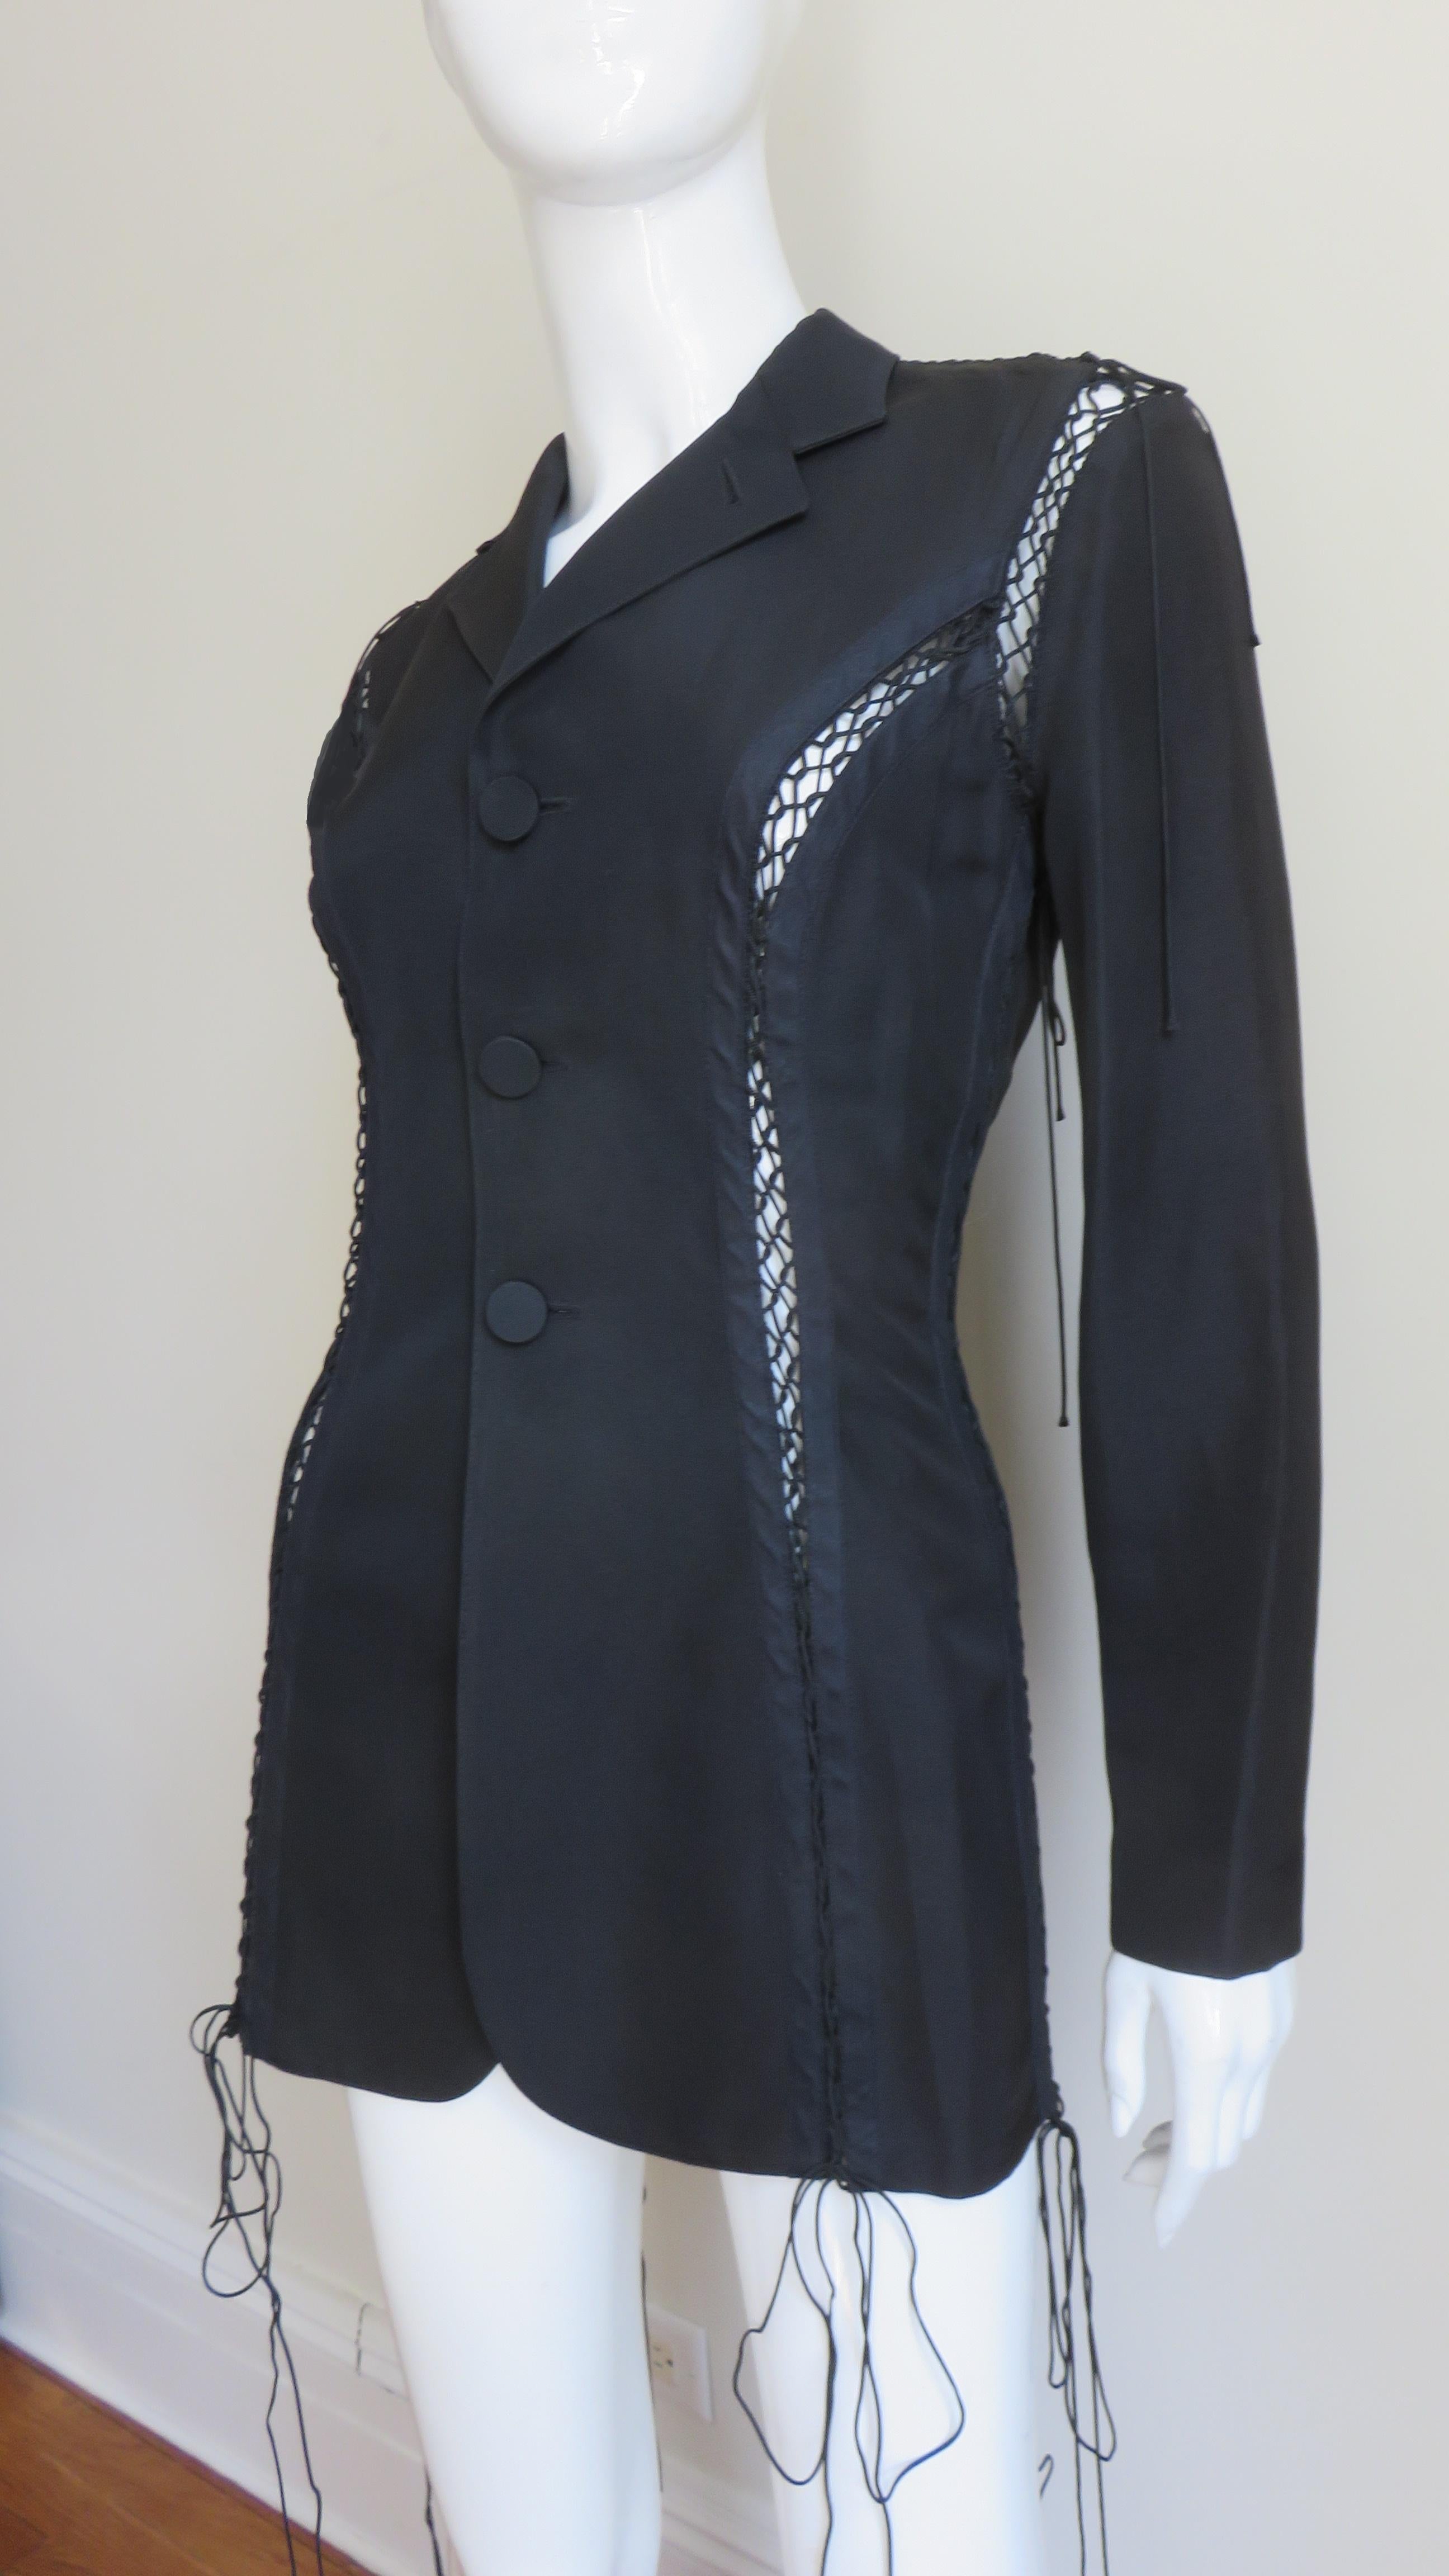 Jean Paul Gaultier Lace up Jacket In Excellent Condition For Sale In Water Mill, NY